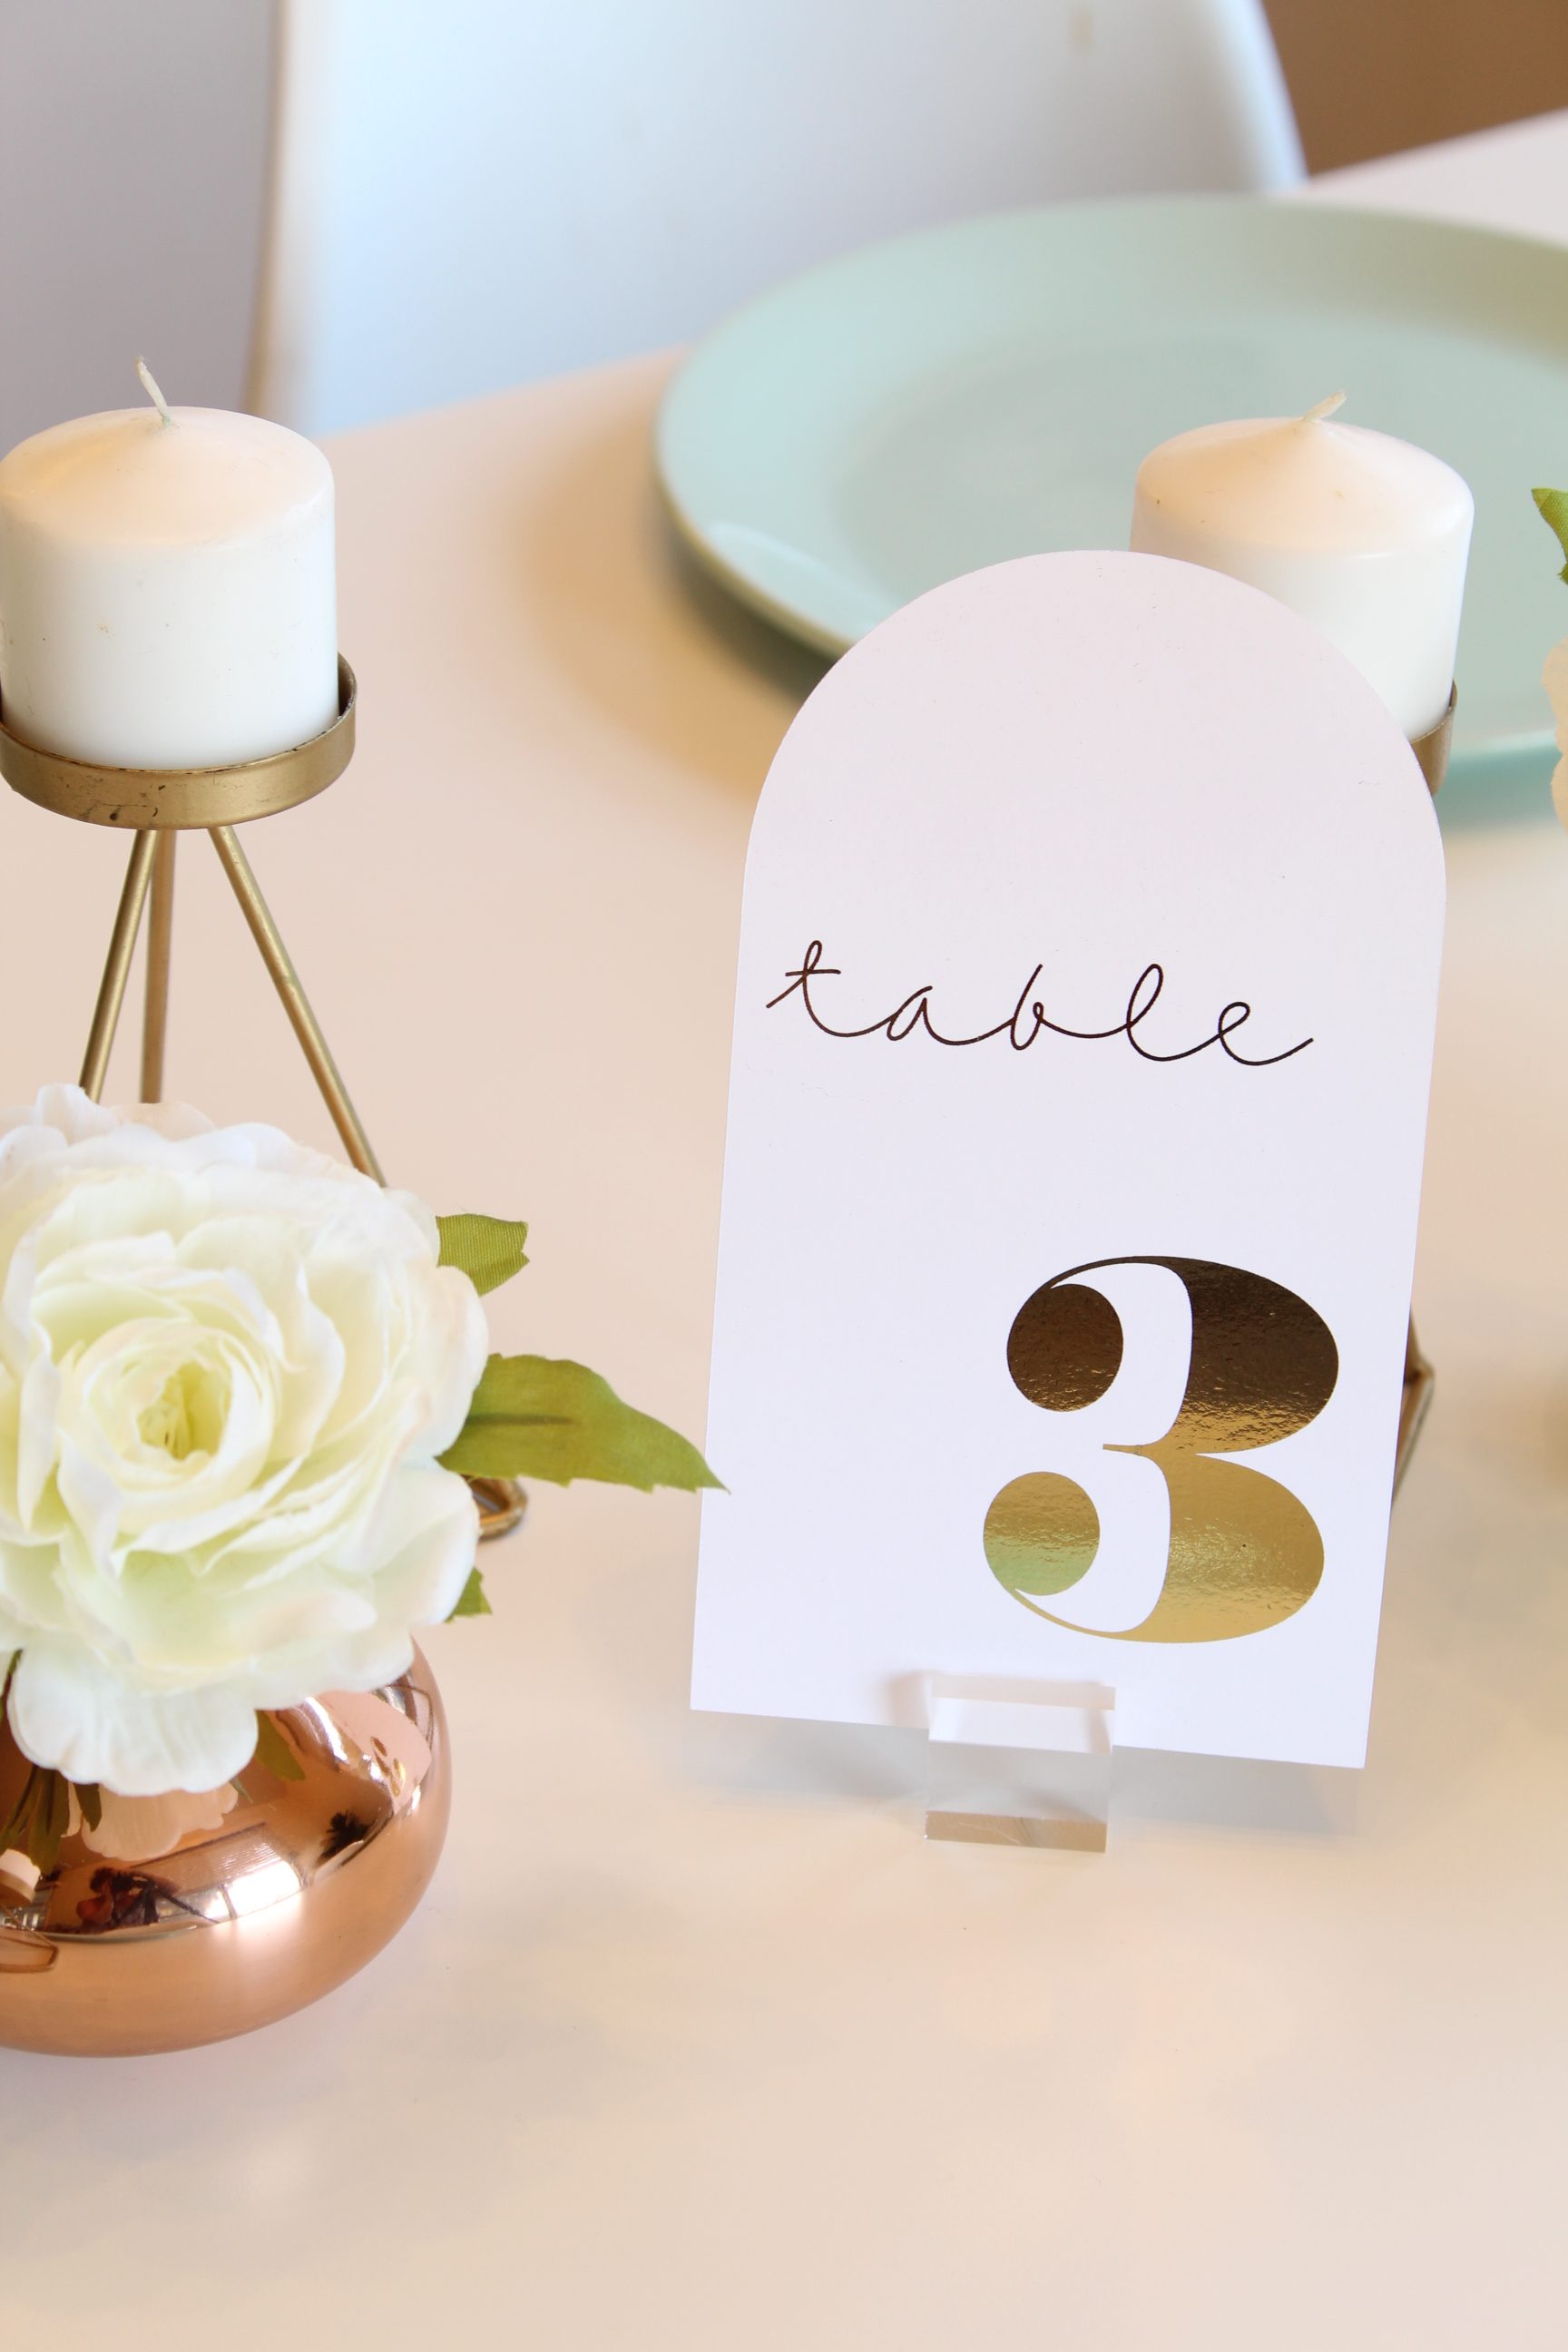 You don't want to miss these ADORABLE DIY Modern Foiled Table Numbers!